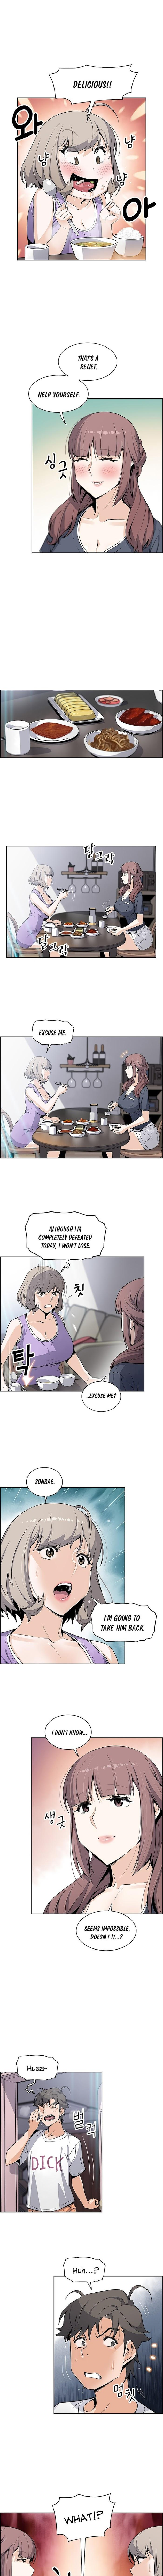 Housekeeper [Neck Pillow, Paper] Ch.49/49 [English] [Manhwa PDF] Completed 320